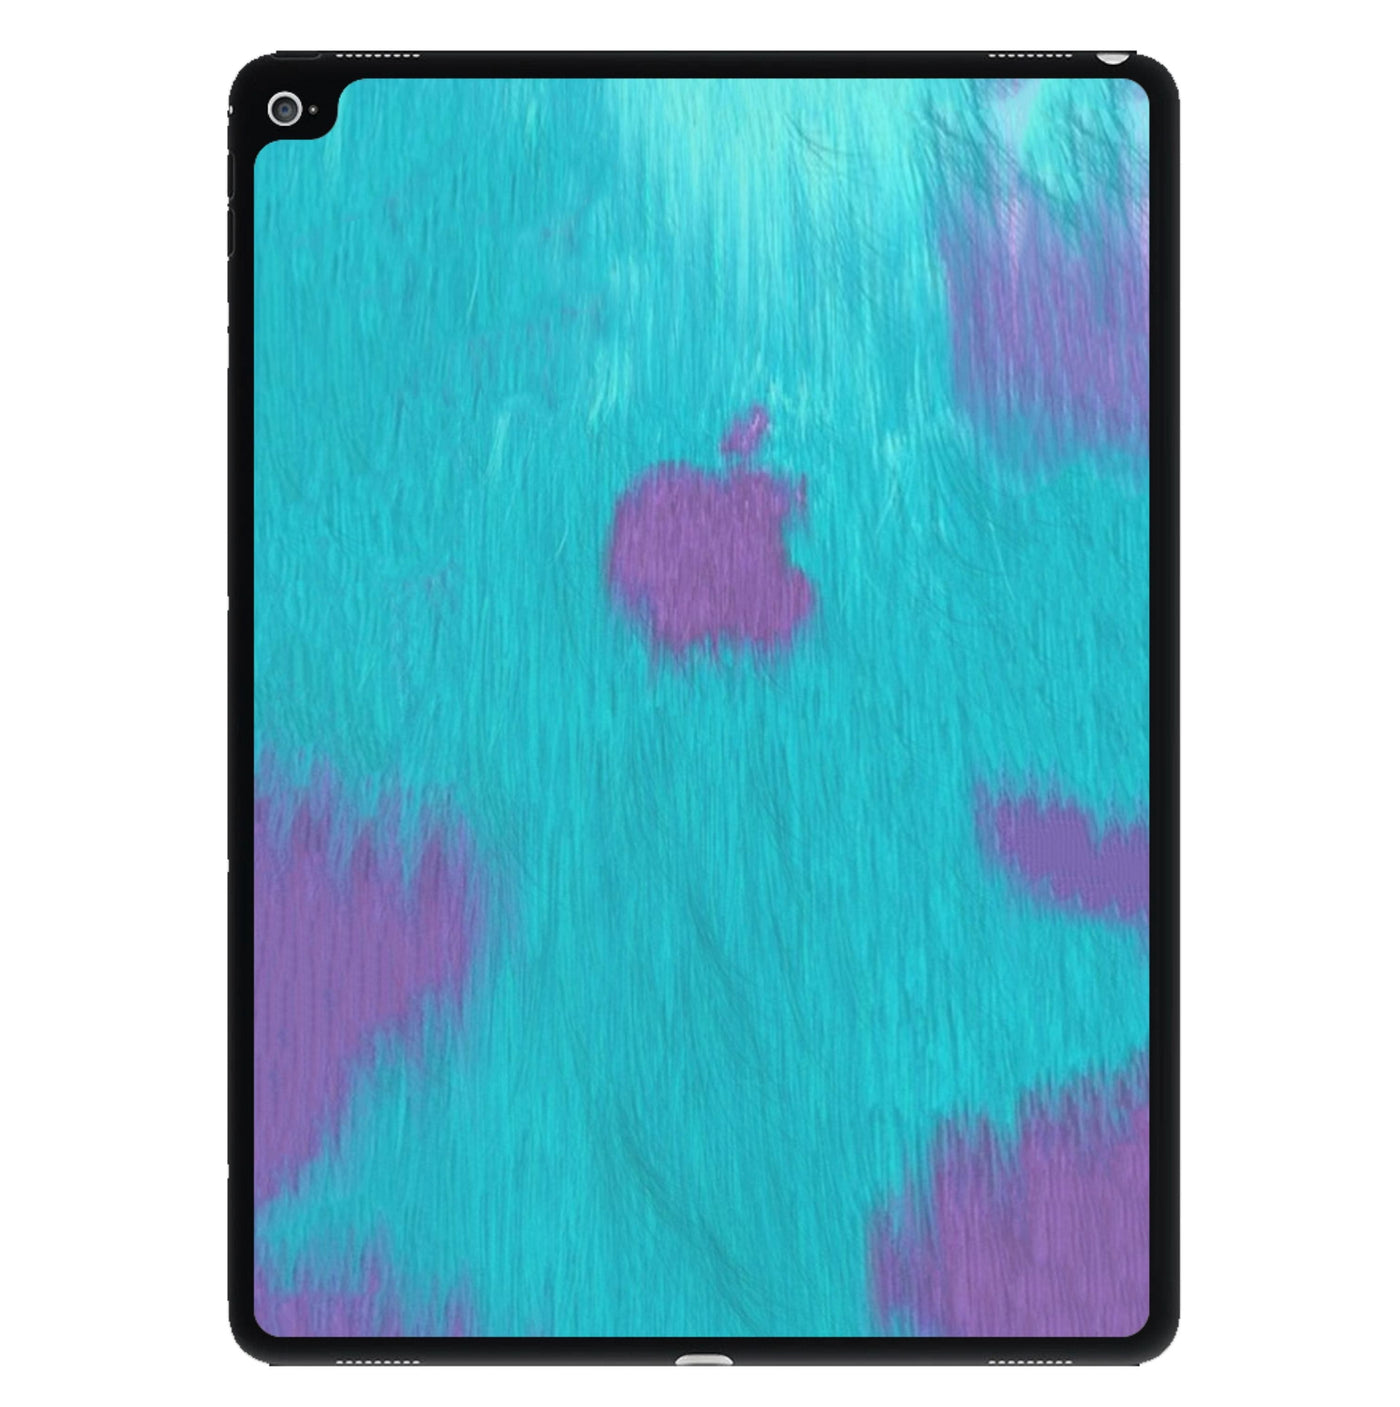 iSulley - Monsters Inc iPad Case